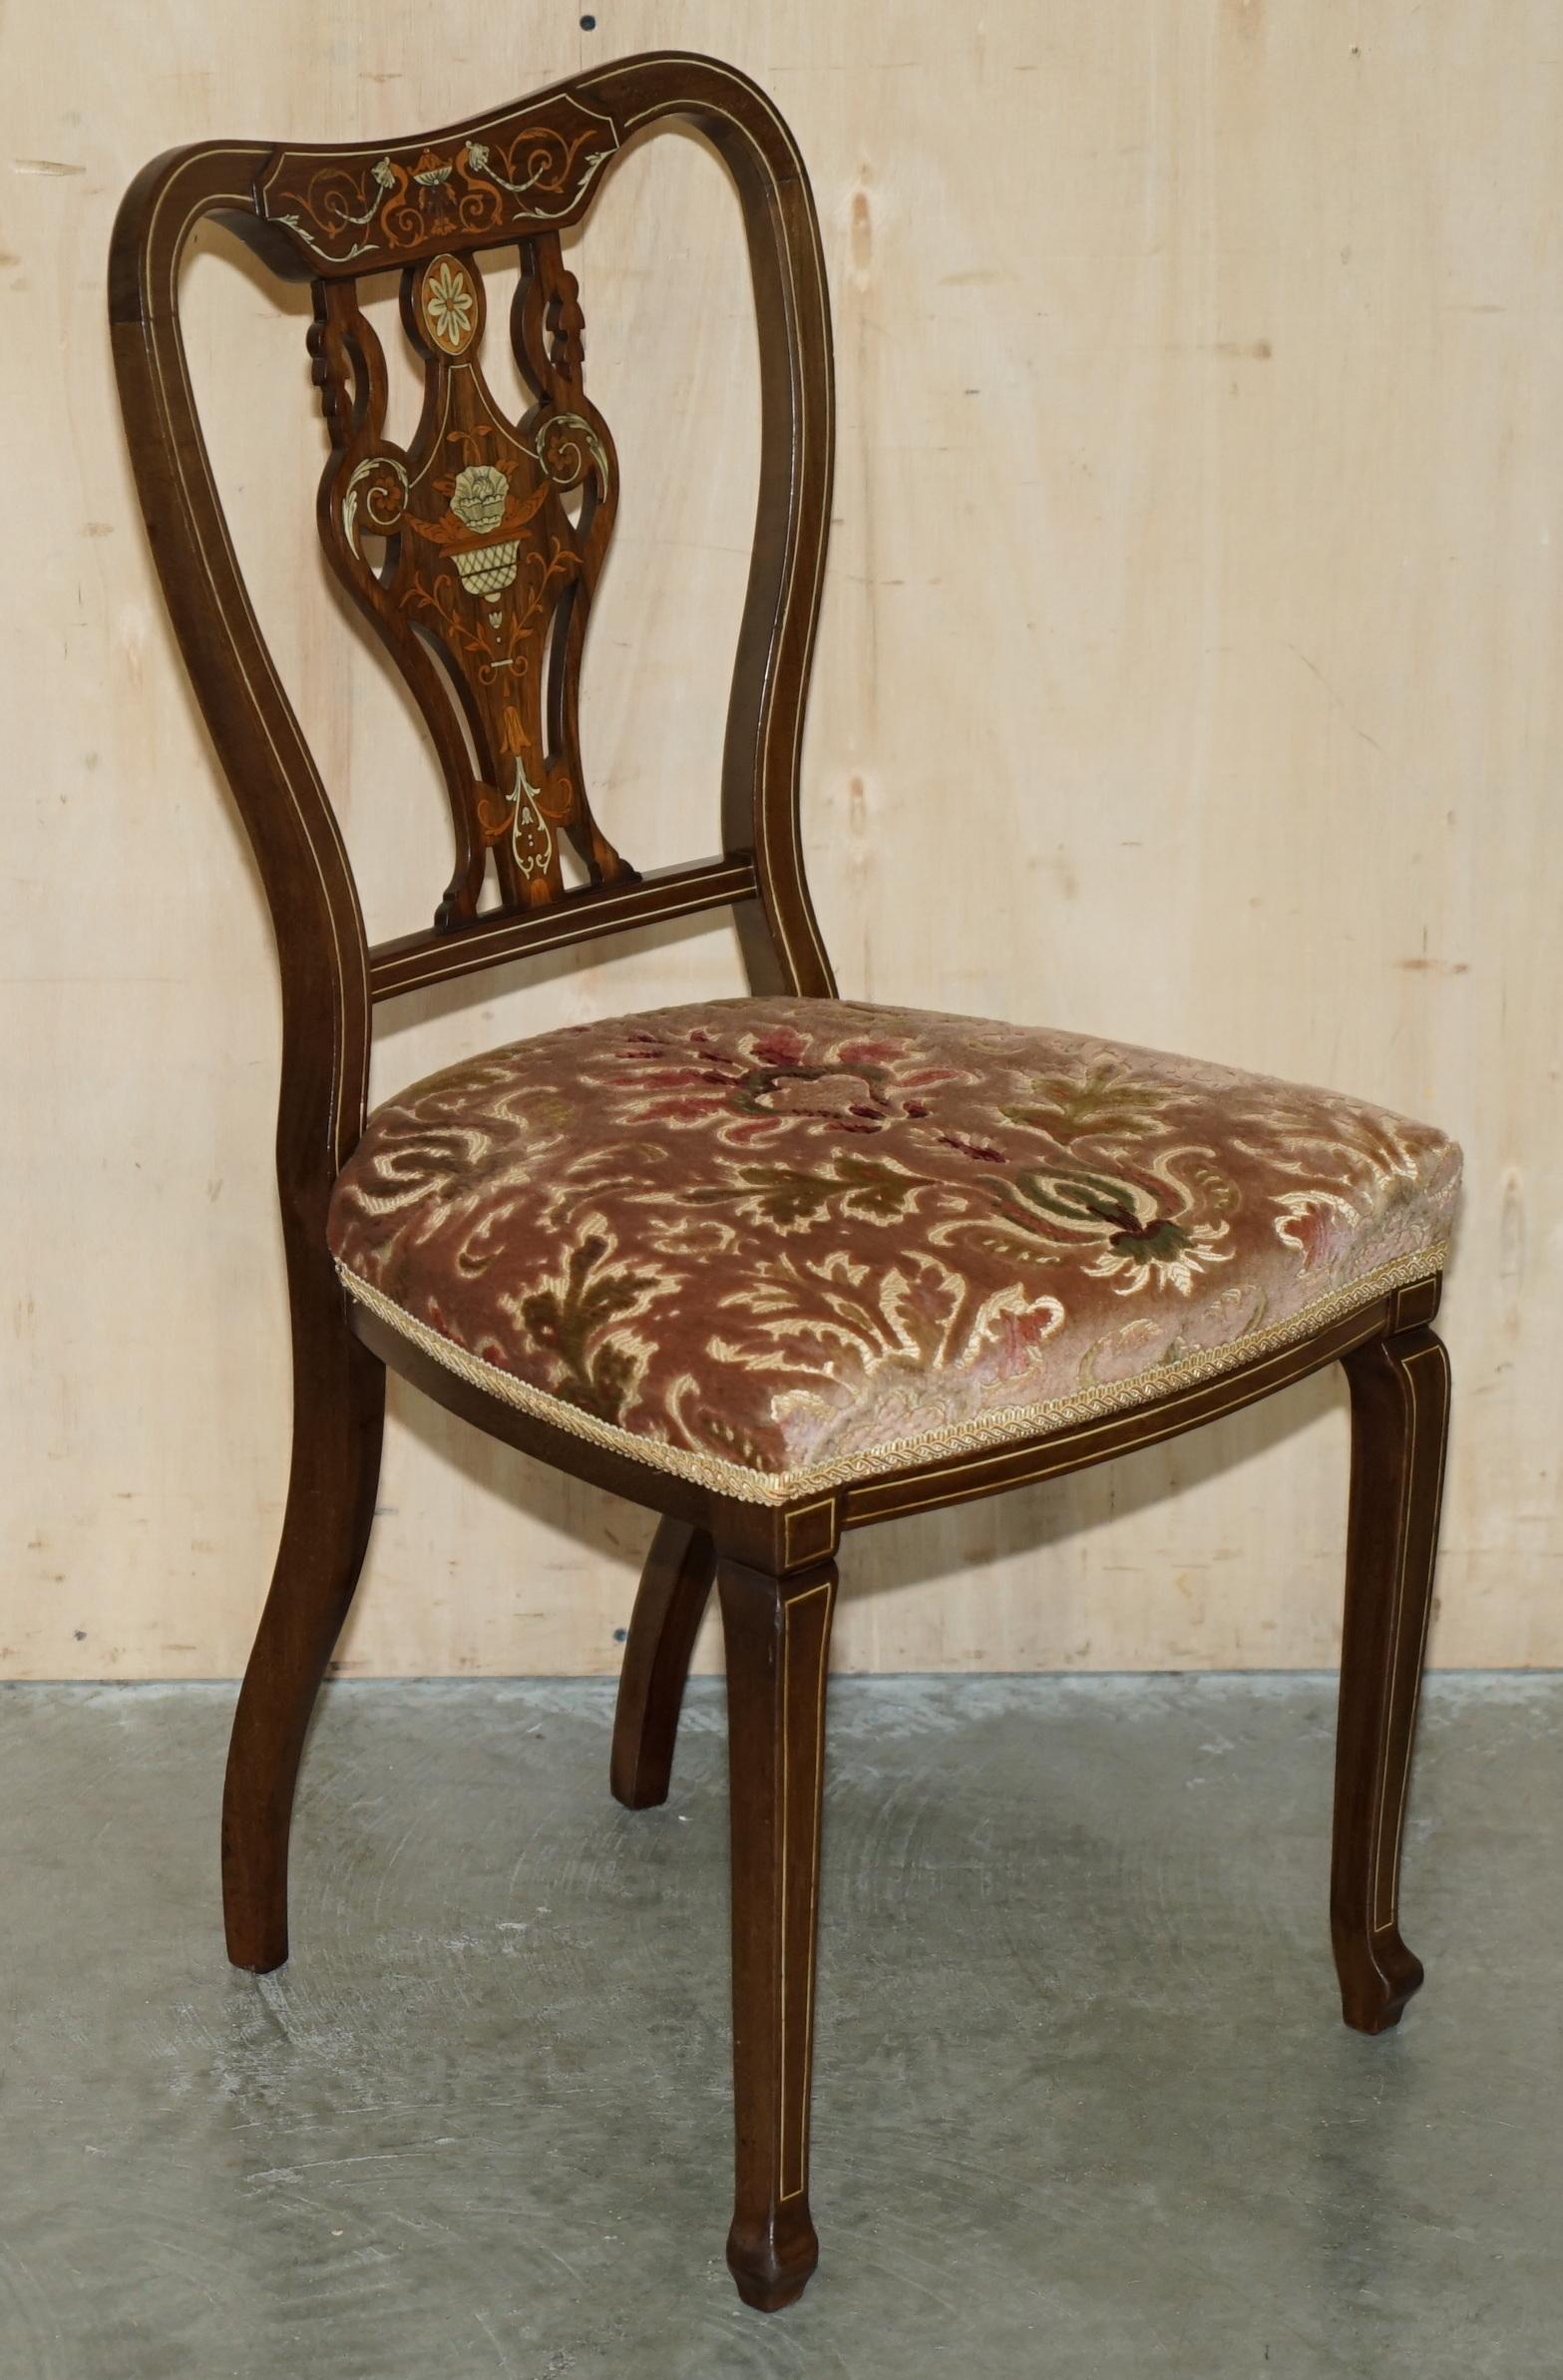 FOUR EXQUISITE ANTIQUE ViCTORIAN JAS SHOOLBRED RETAILED HARDWOOD DINING CHAIRS For Sale 6